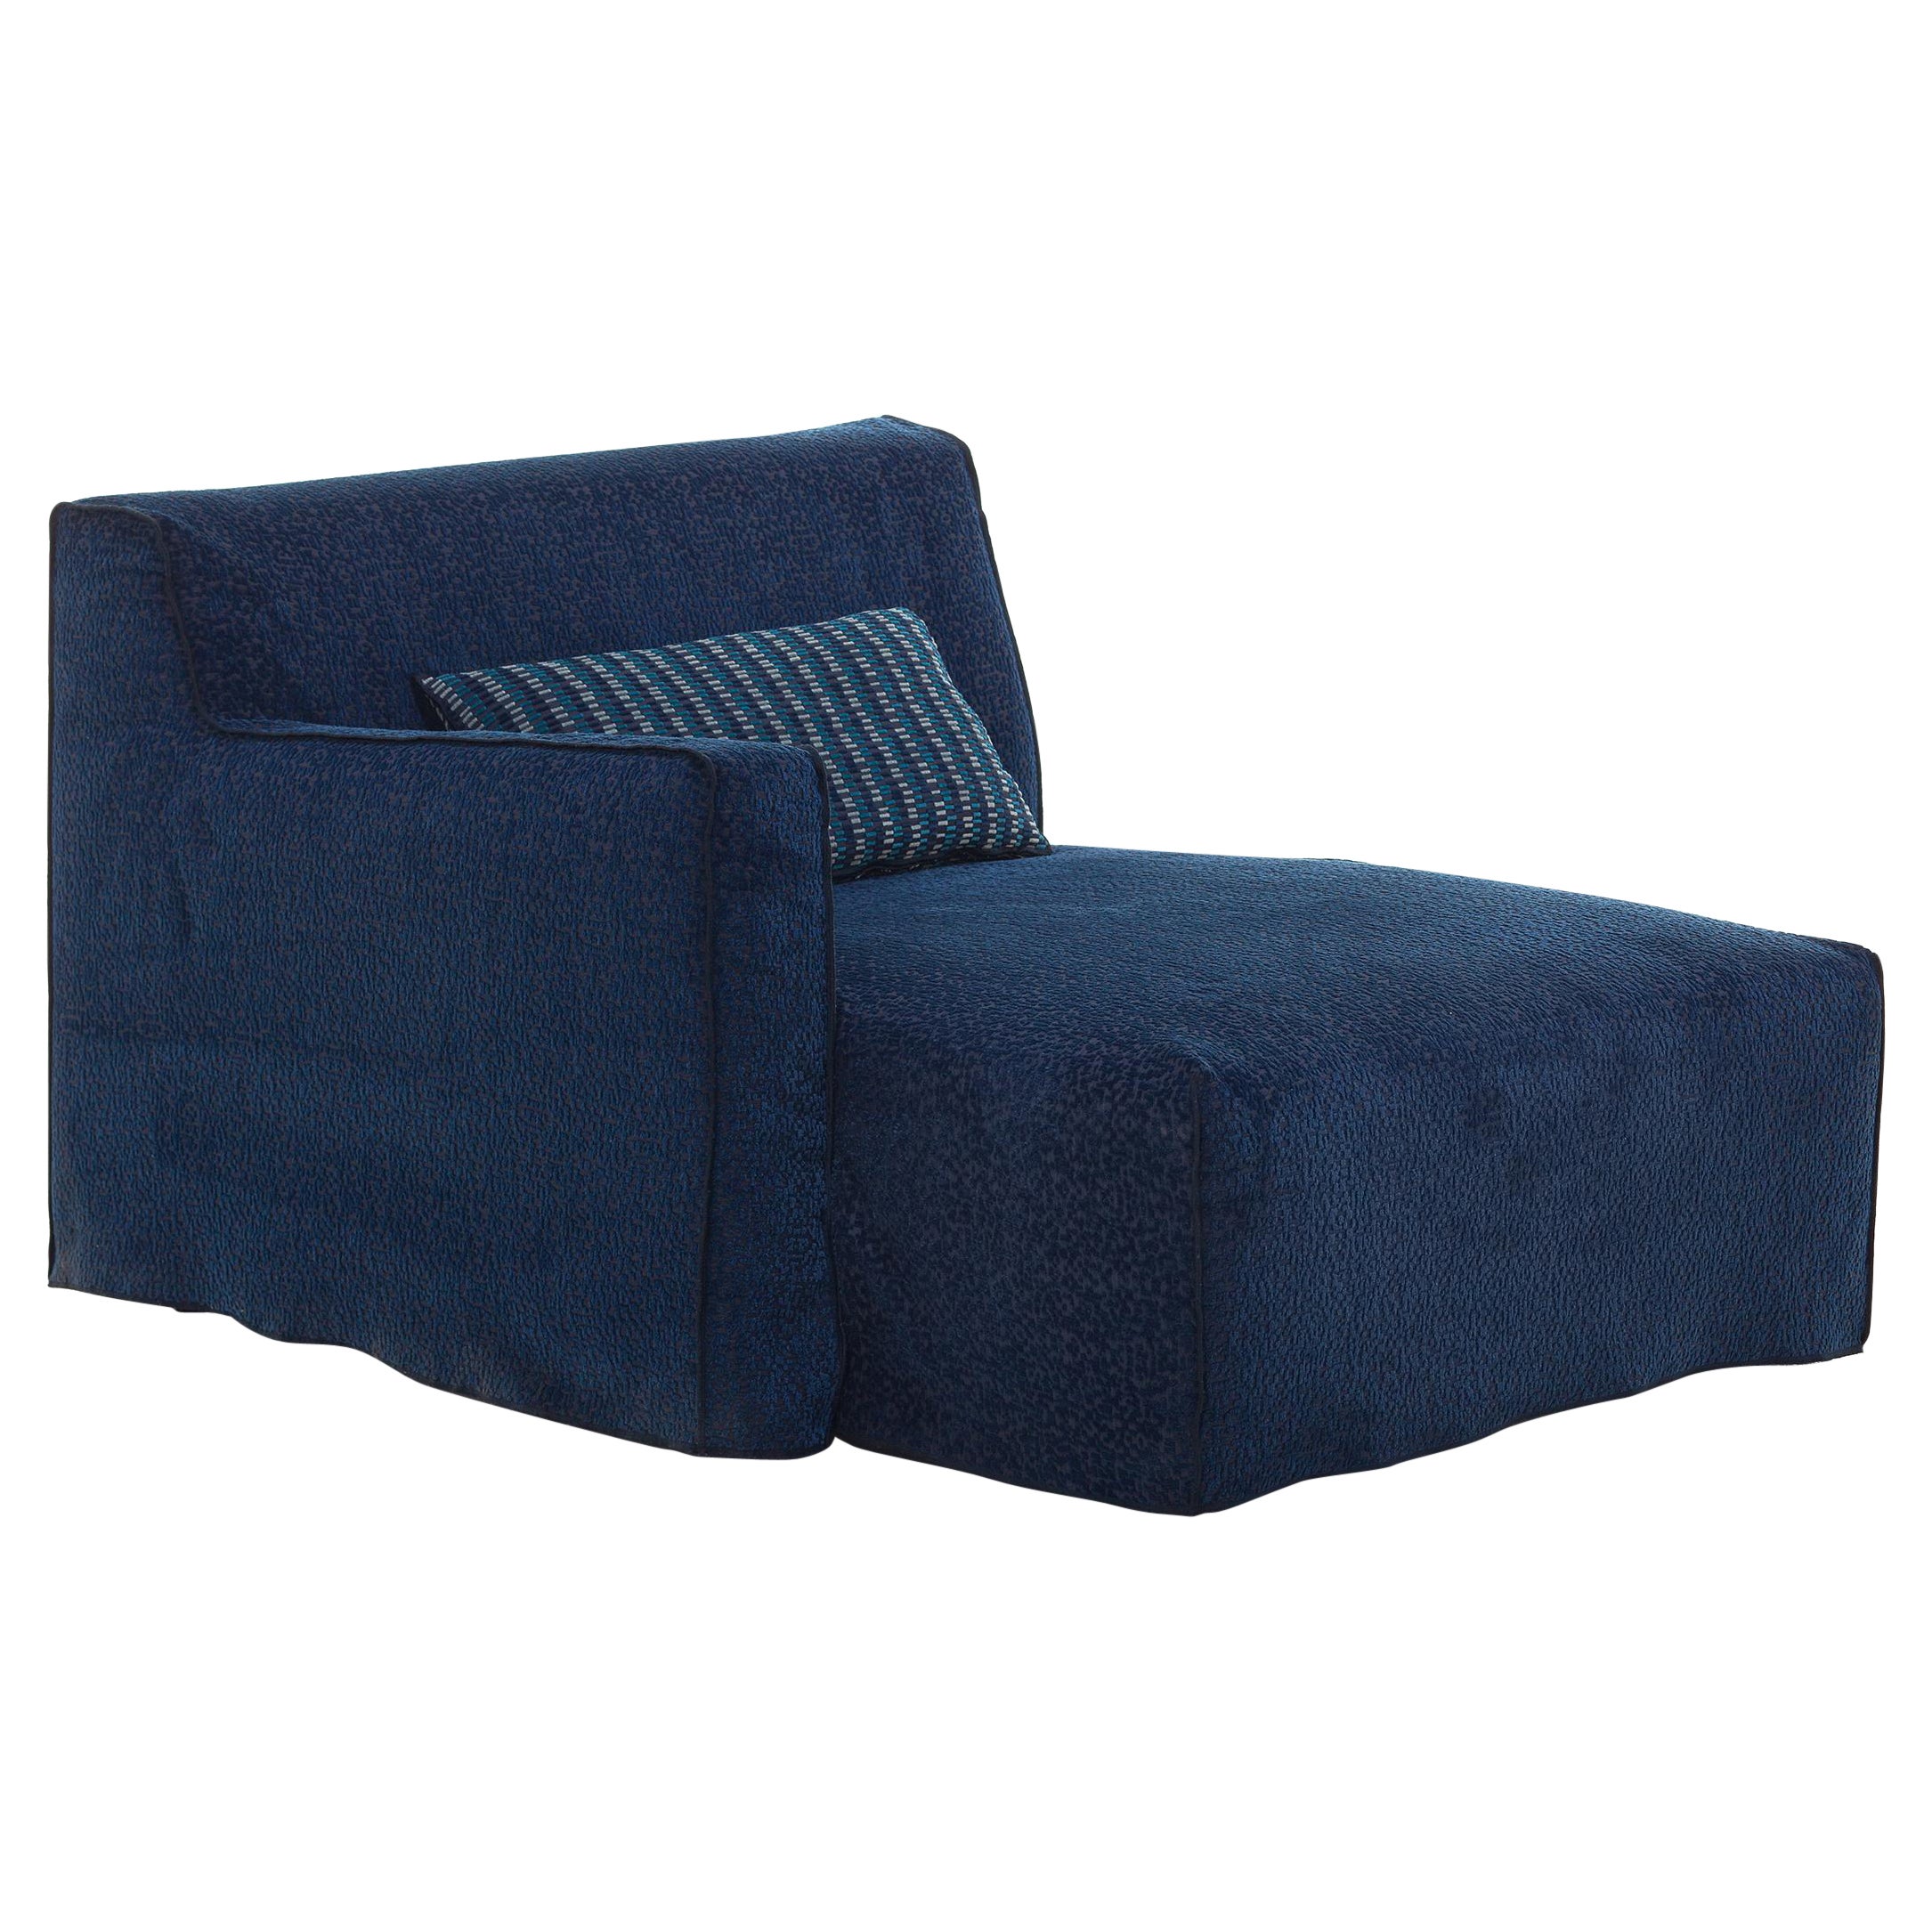 Gervasoni More 20 L Arm Modular Dormeuse in Midnight Upholstery, Paola Navone